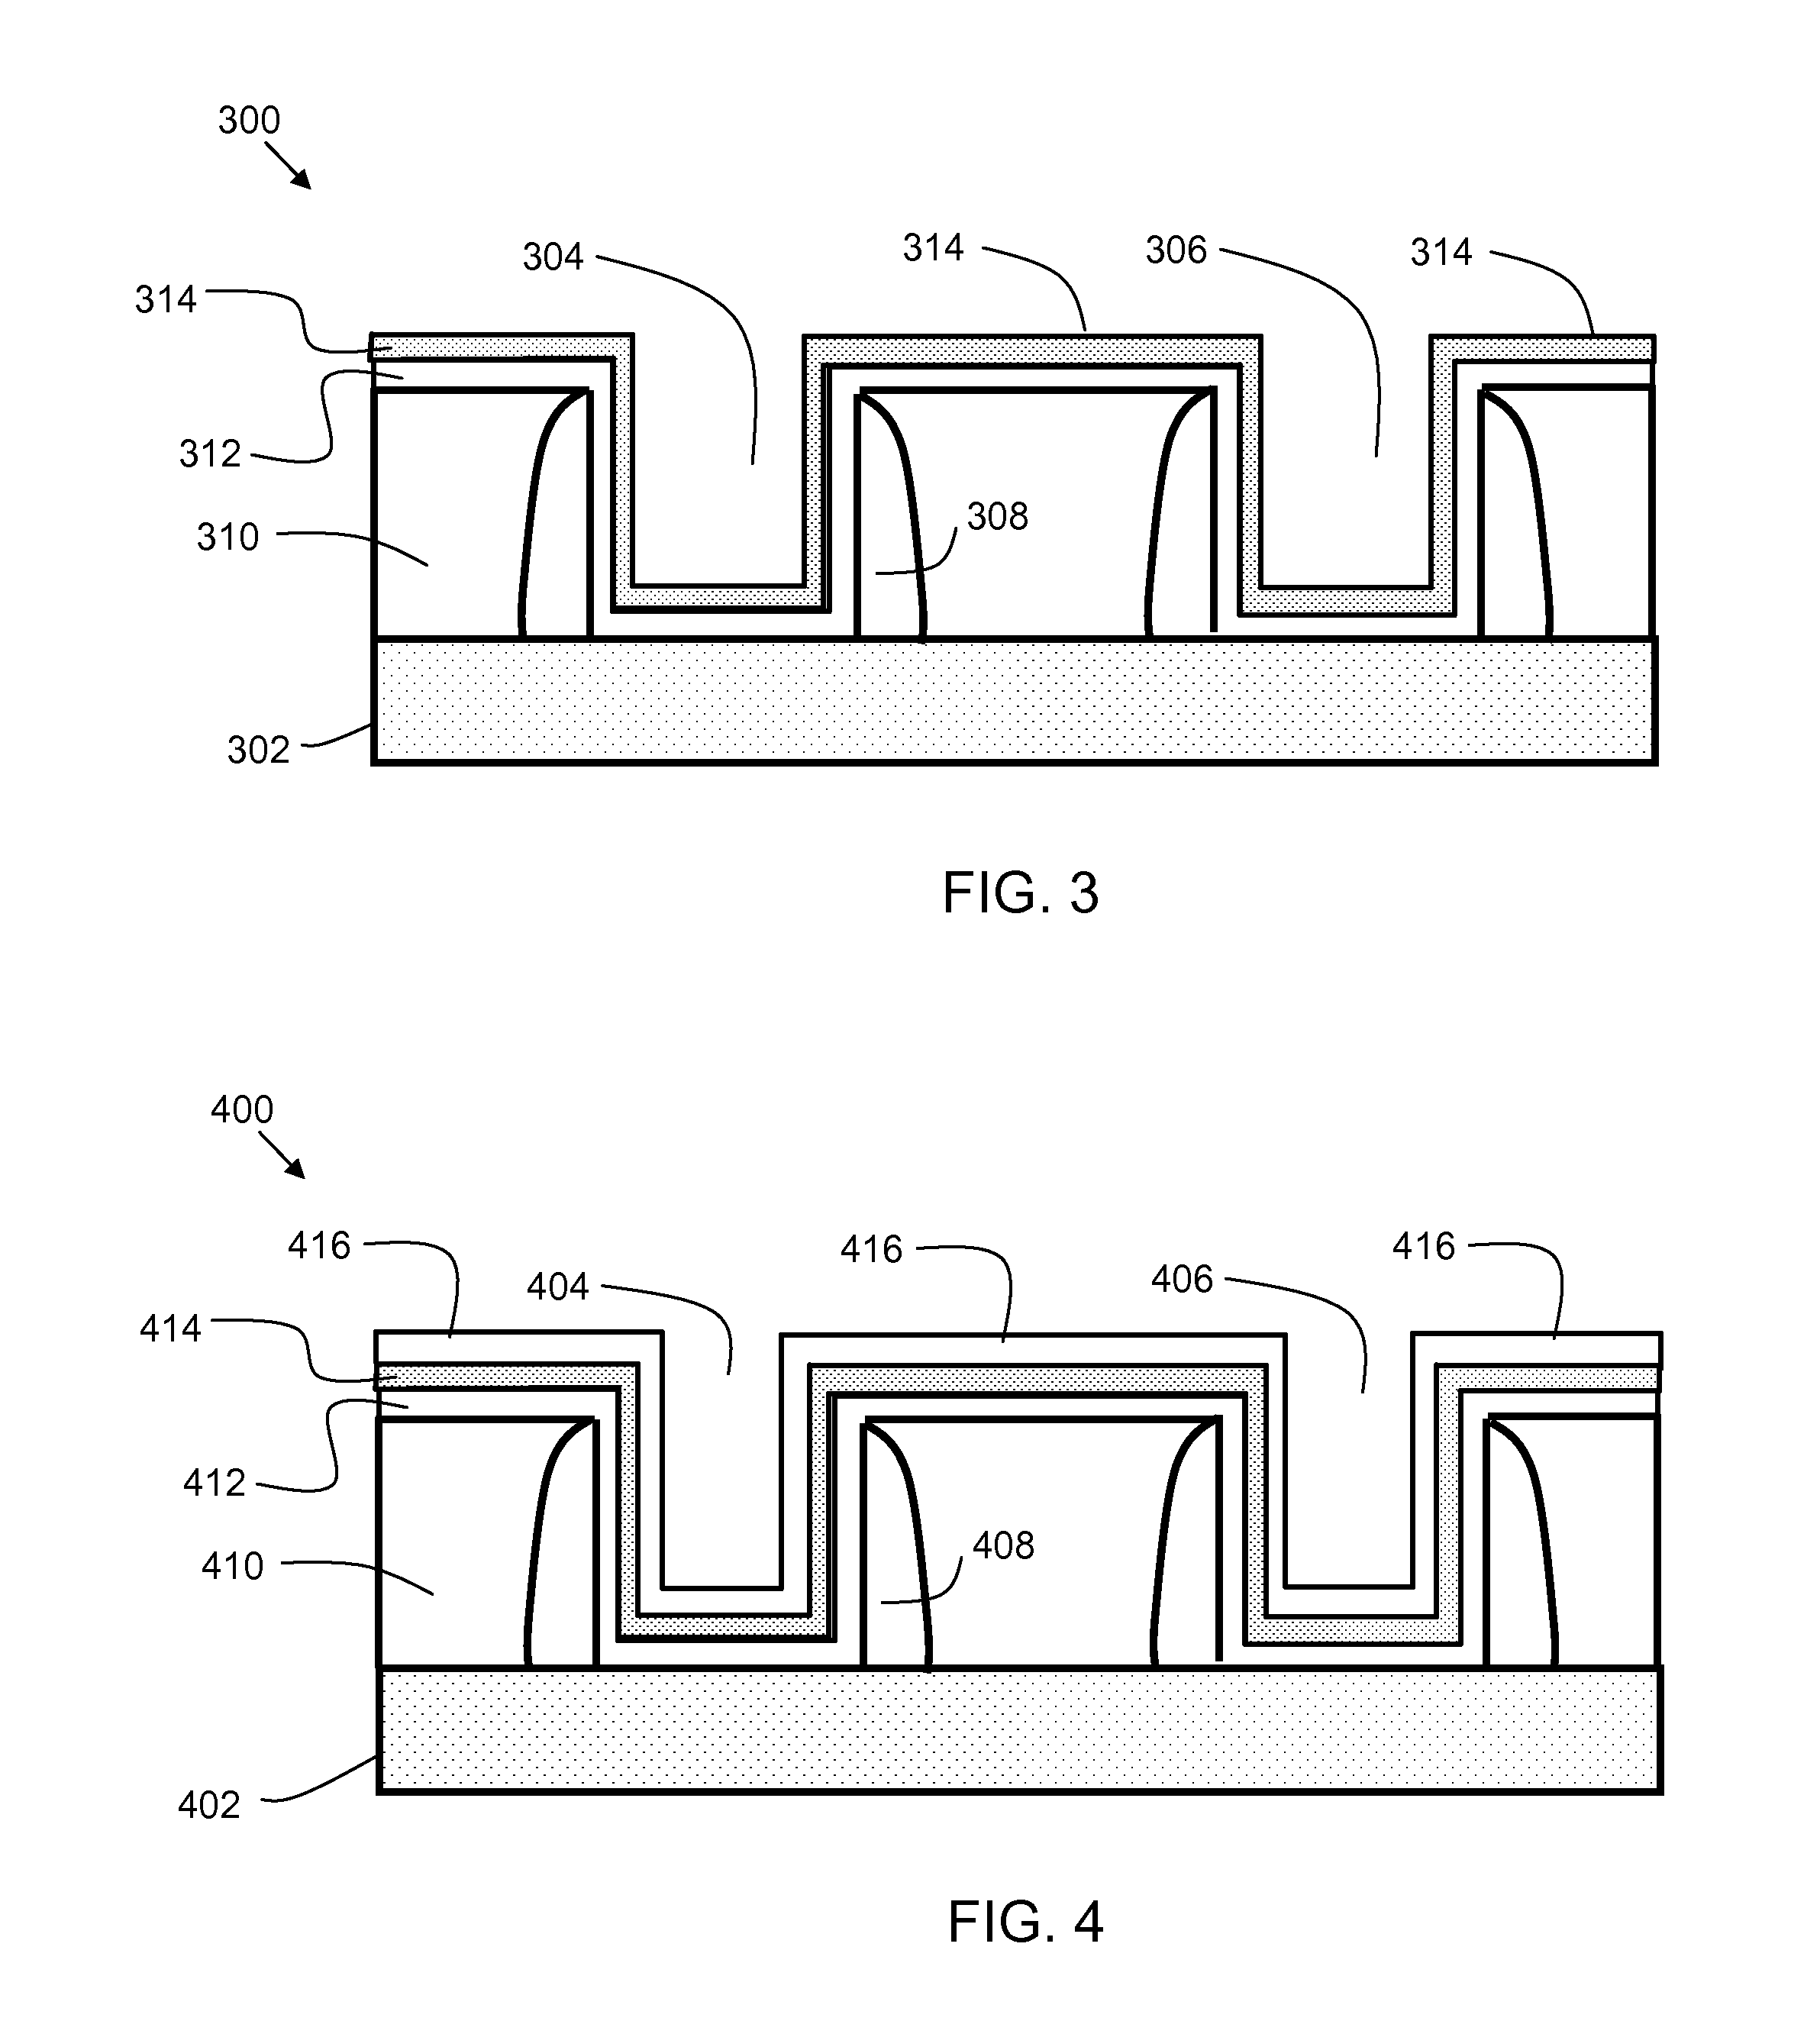 Dual metal fill and dual threshold voltage for replacement gate metal devices